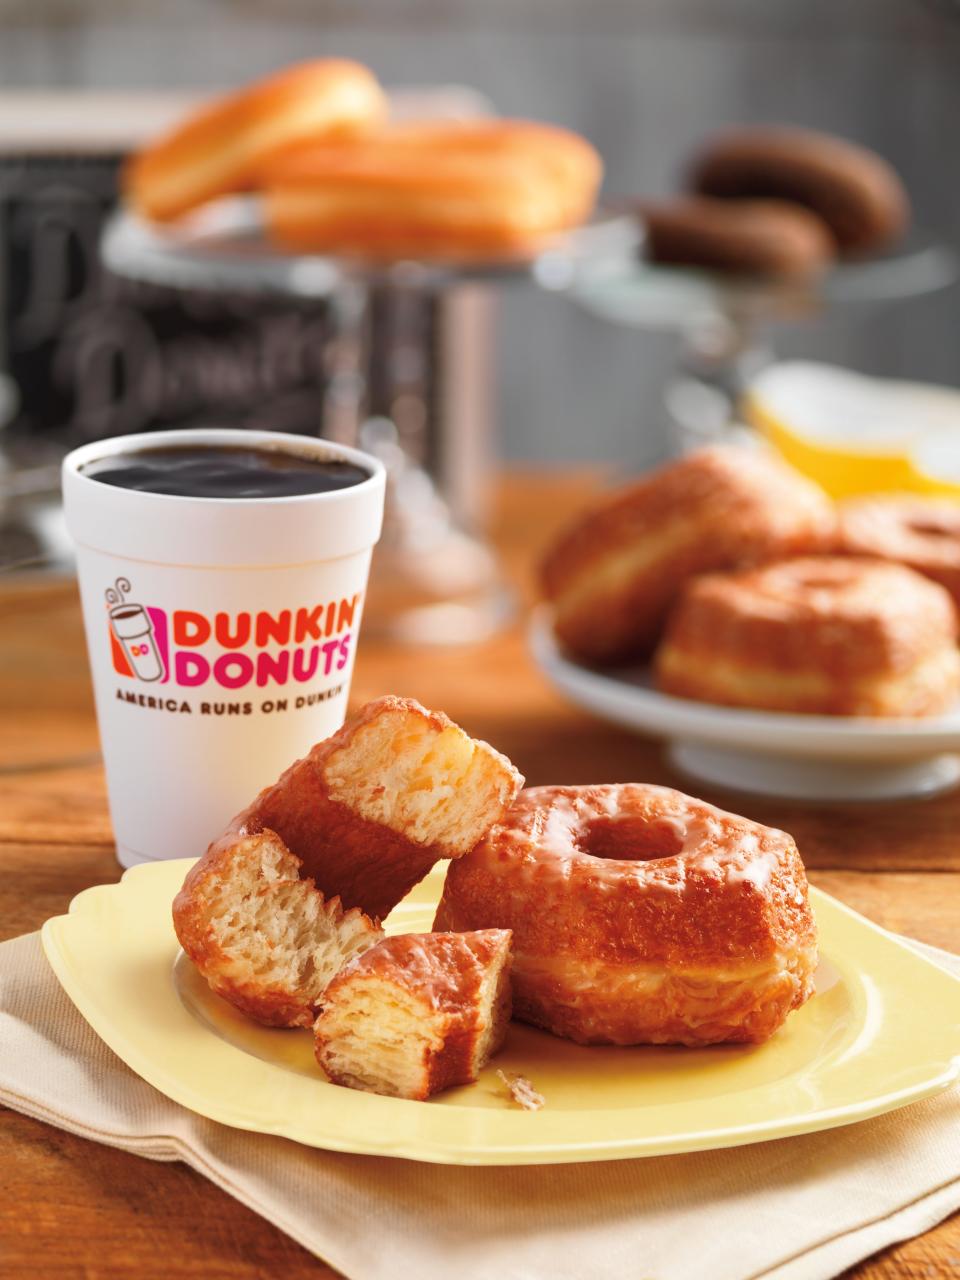 Dunkin' is offering free donuts on Friday with the purchase of a drink in honor of National Donut Day.